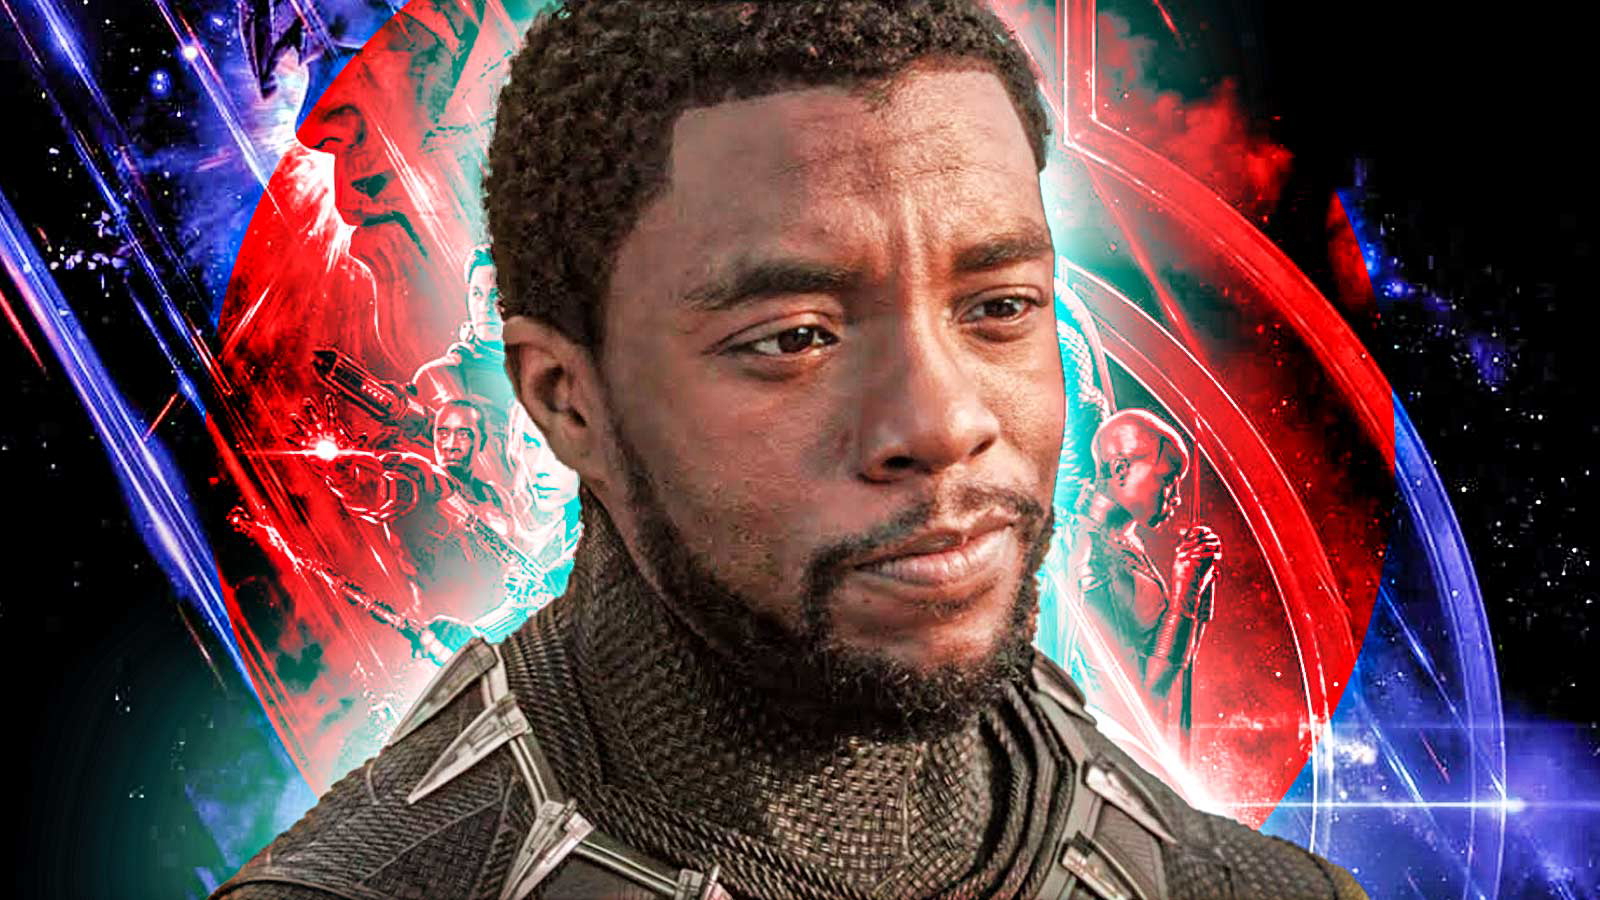 “I don’t think it was an outsiders problem”: Chadwick Boseman’s Legacy Gets Thrown Into the Spotlight Again as Fans Compare Black Panther 2 to Avengers: Endgame Scene